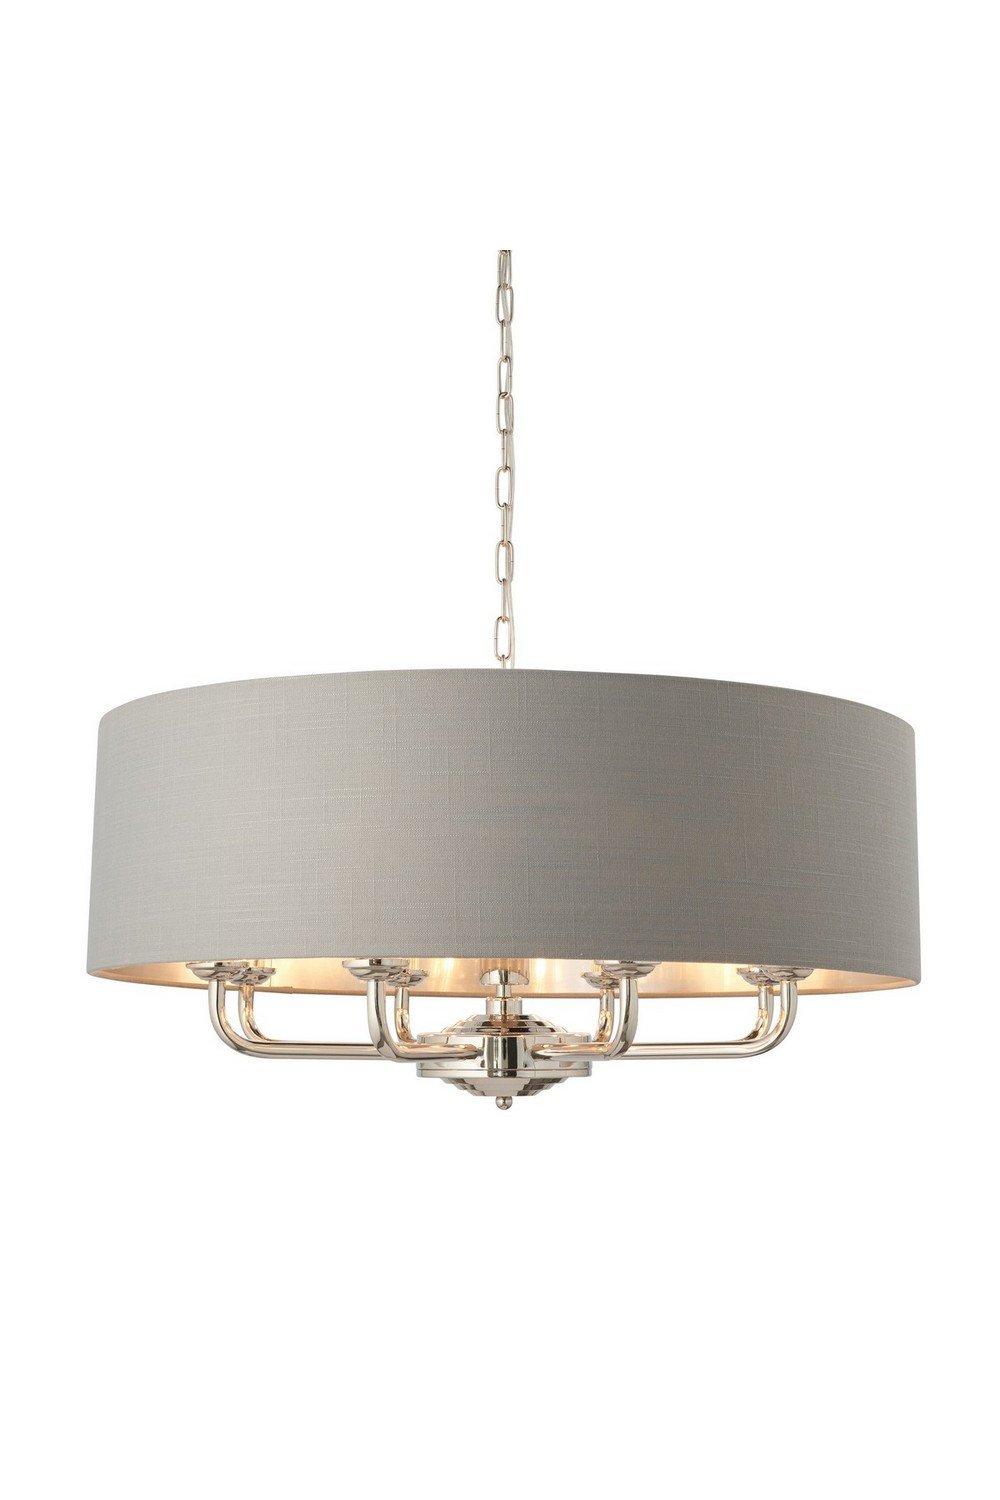 Highclere Single Shade Pendant Light Bright Nickel Plate Charcoal Fabric